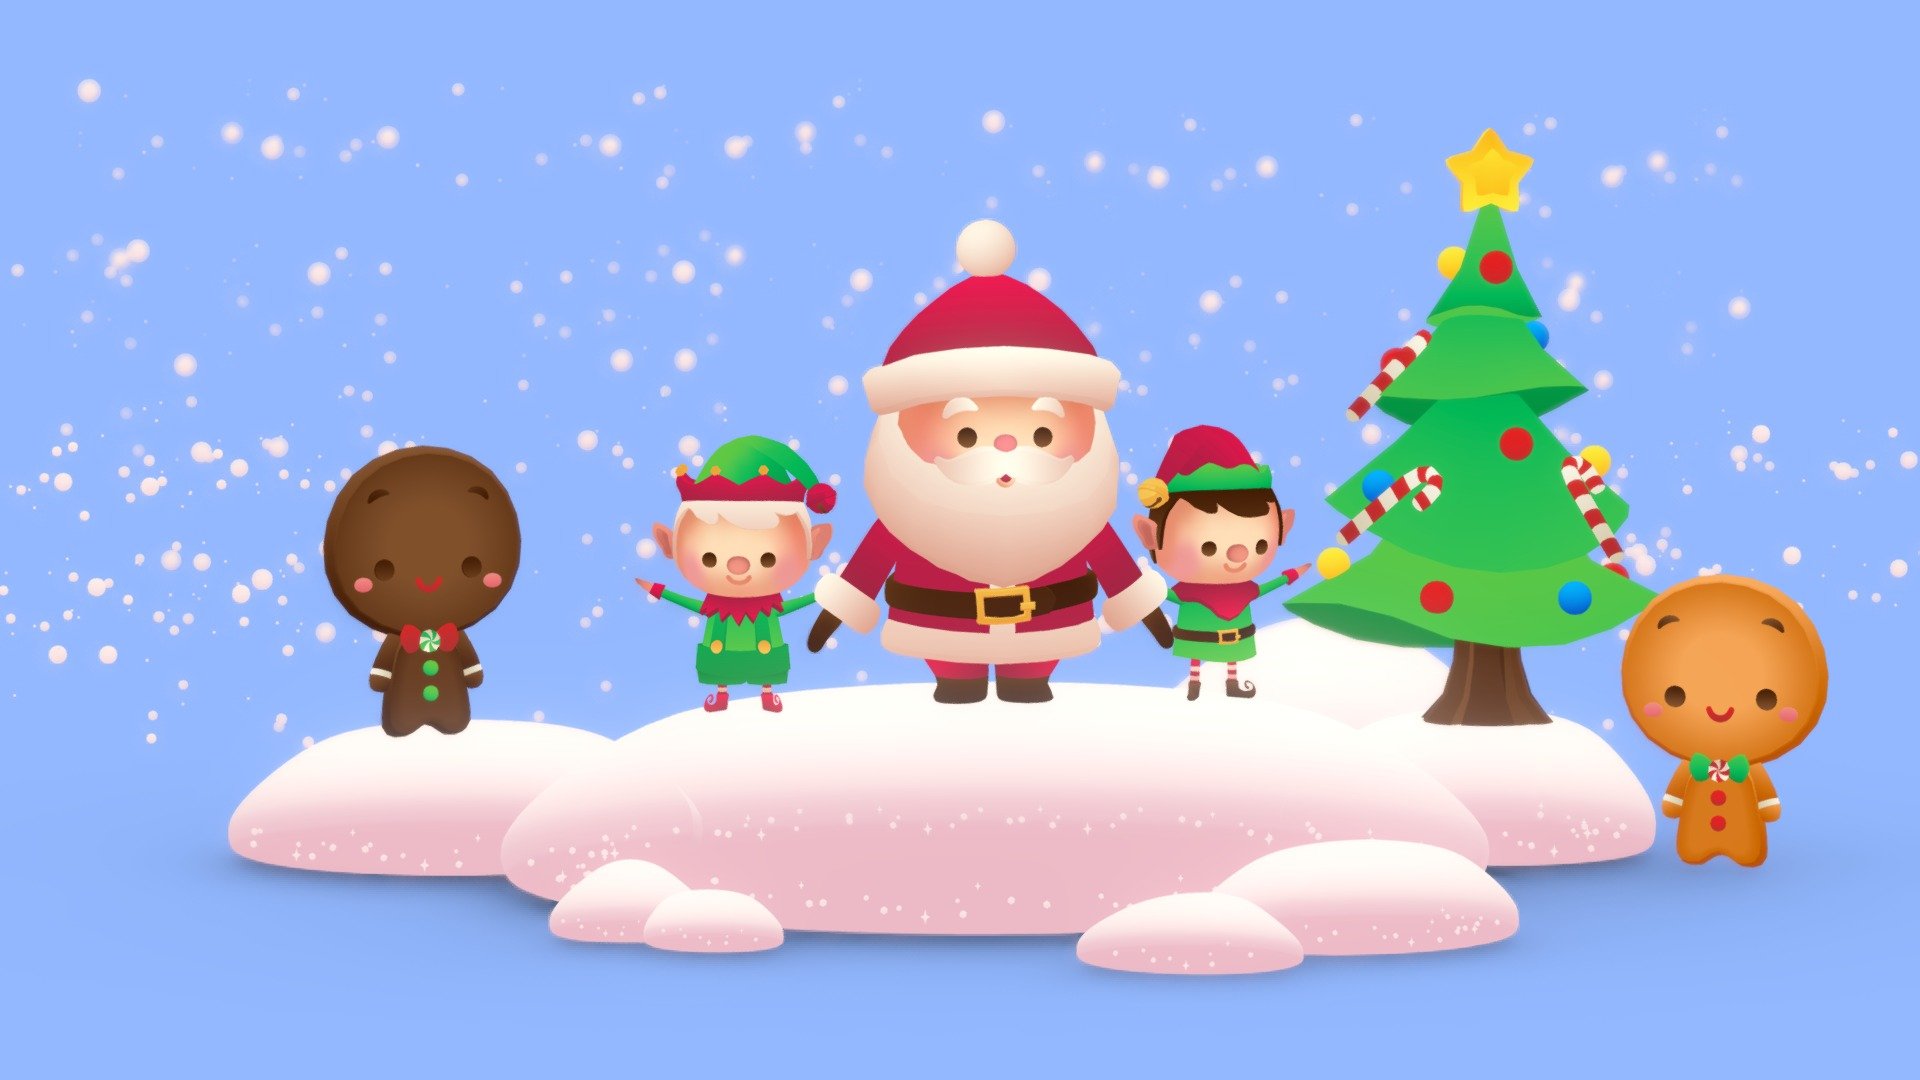 🎅🎄 Happy holidays! 🎄🎅

Spice up your christmas special in your game with this cute santa claus christmas pack, use it in your render scenes and games.
Textured with gradient atlas, so it is performant for mobile games and video games.

Like a few of my other assets in the same style, it uses a single texture diffuse map and is mapped using only color gradients. All gradient textures can be extended and combined to a large atlas.

There are more assets in this style to add to your game scene or environment. Check out my sale.

If you want to change the colors of the assets, you just need to move the UVs on the atlas to a different gradient. Or contact me for changes, for a small fee.

-------------Terms of Use--------------

Commercial use of the assets provided is permitted but cannot be included in an asset pack or sold at any sort of asset/resource marketplace 3d model